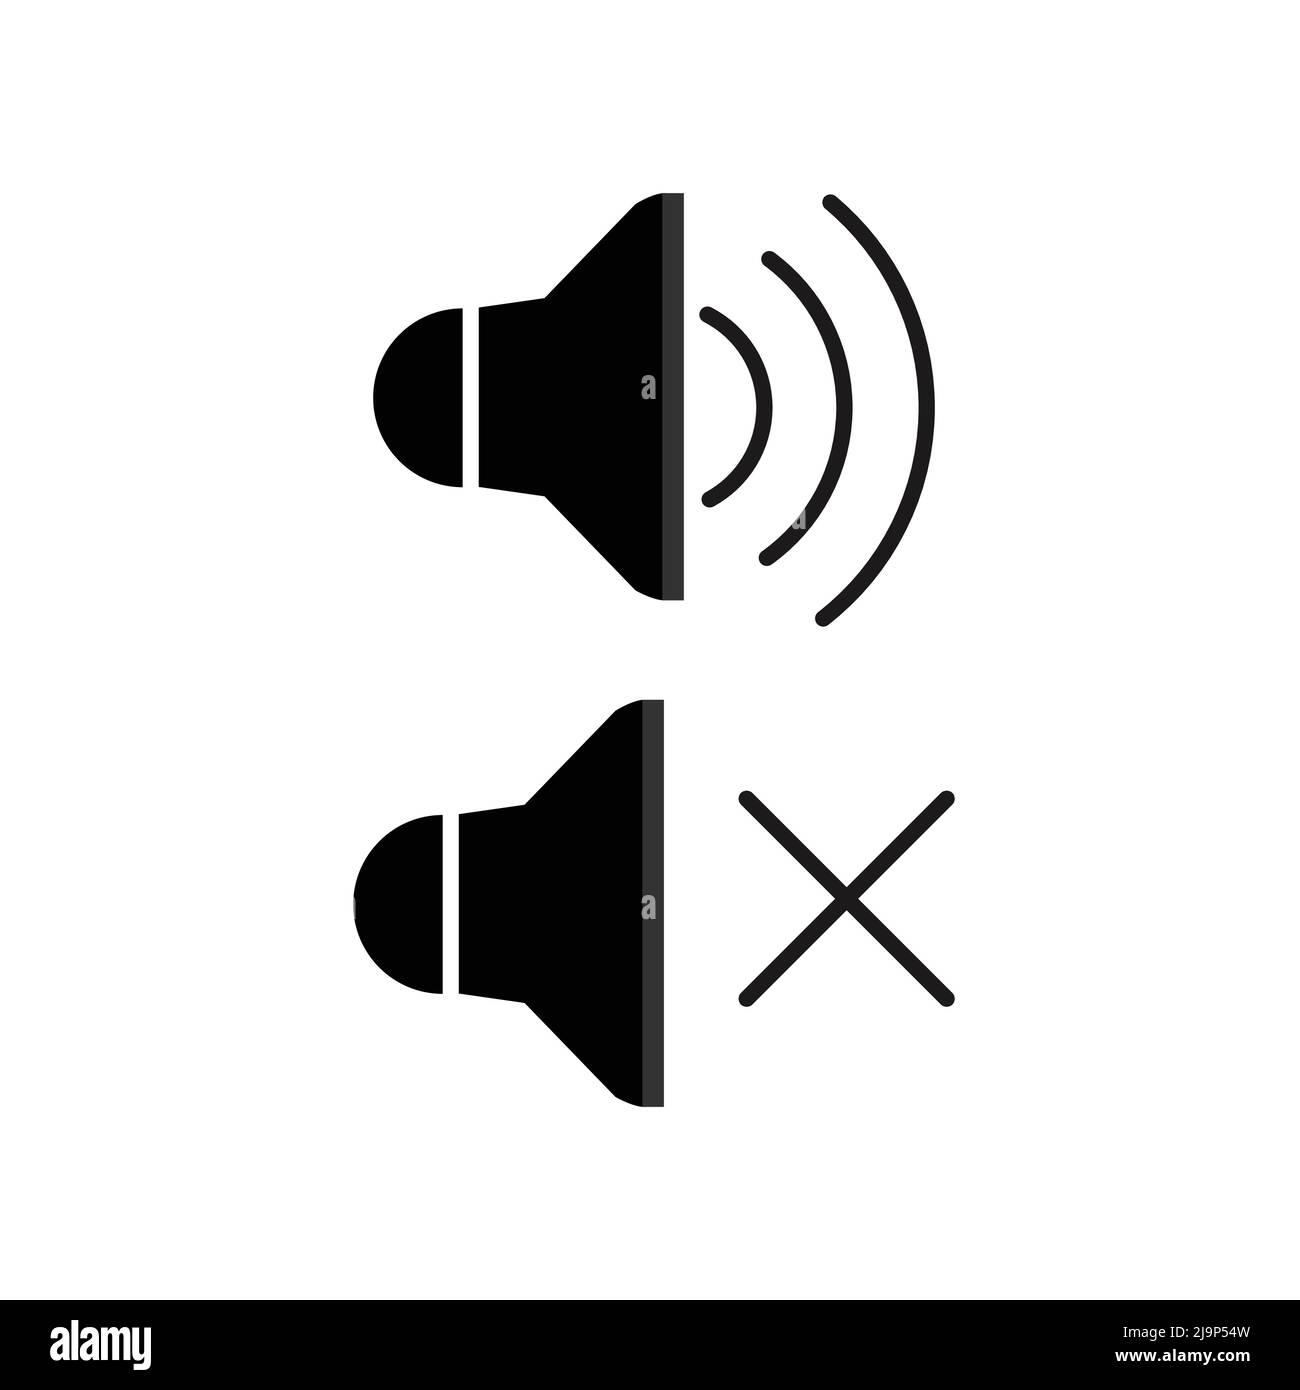 sound on and sound mute icon. on white background Stock Vector